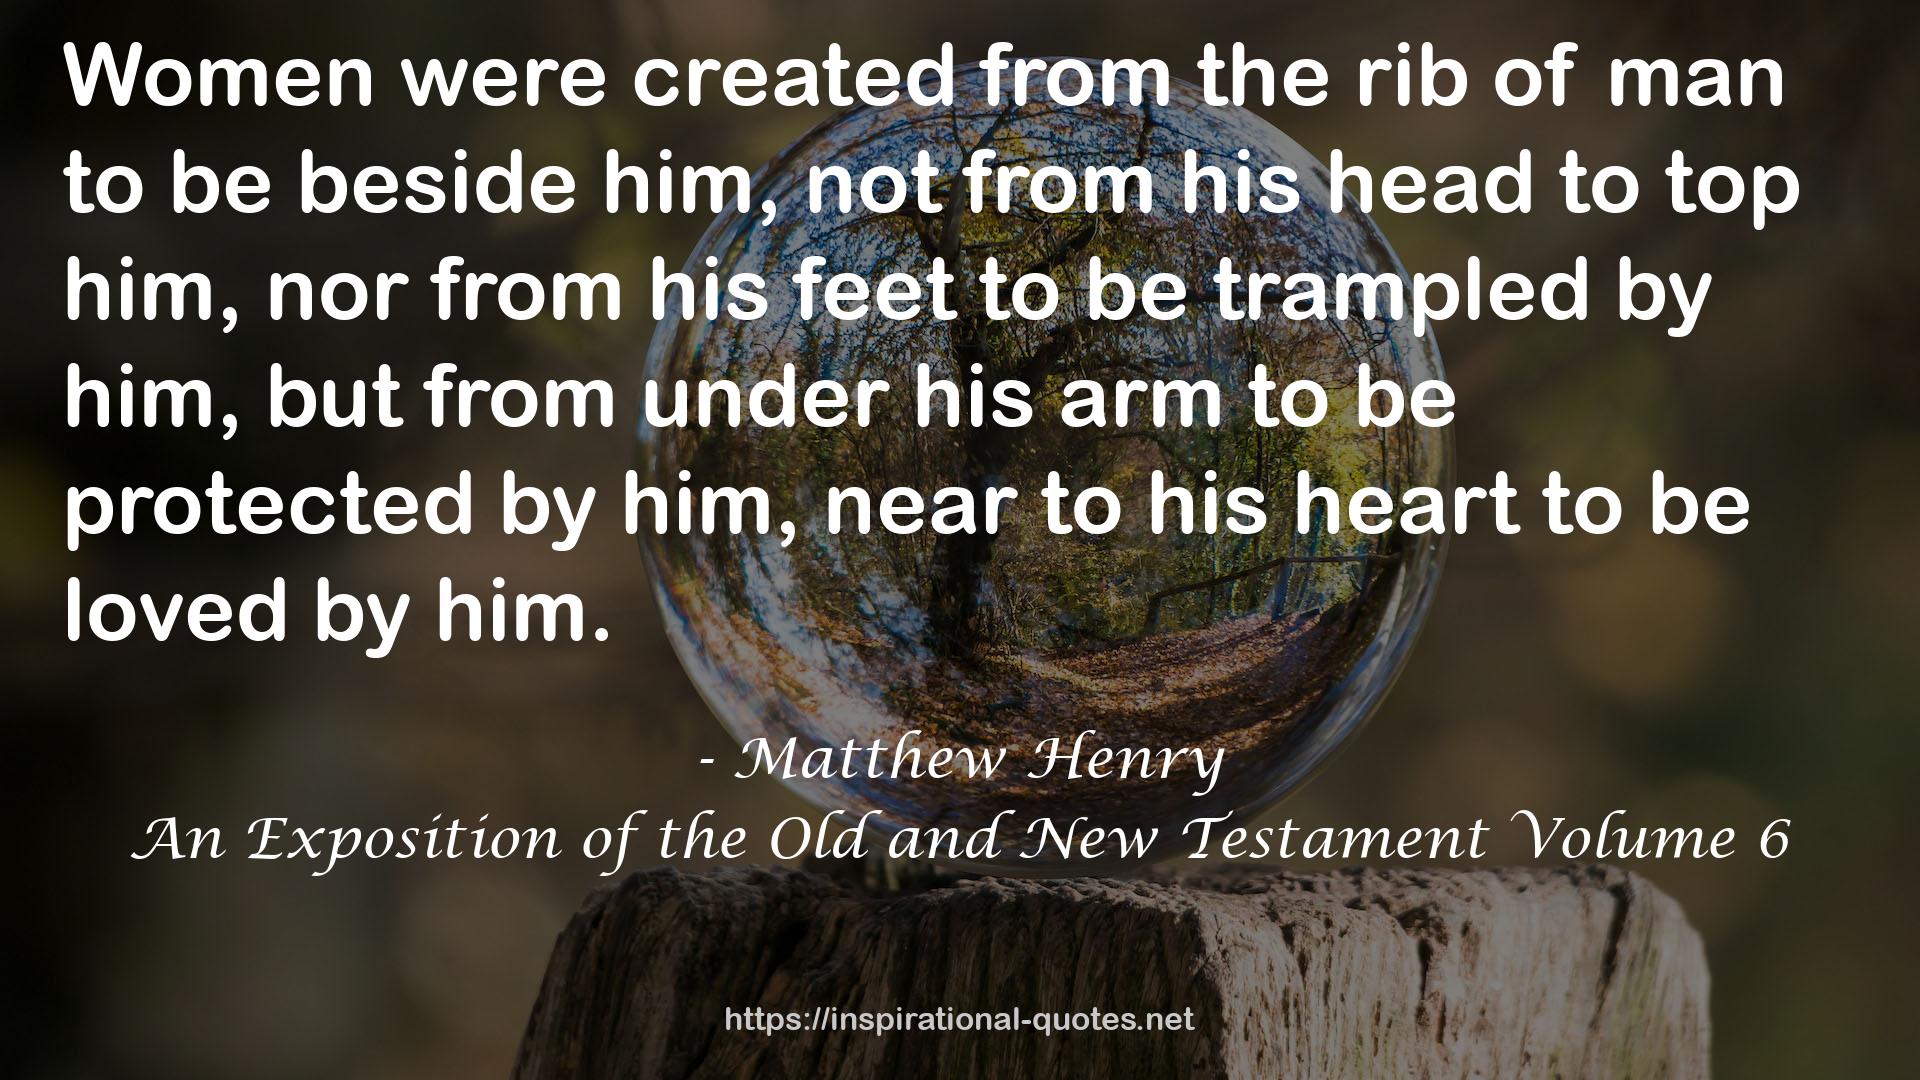 An Exposition of the Old and New Testament Volume 6 QUOTES